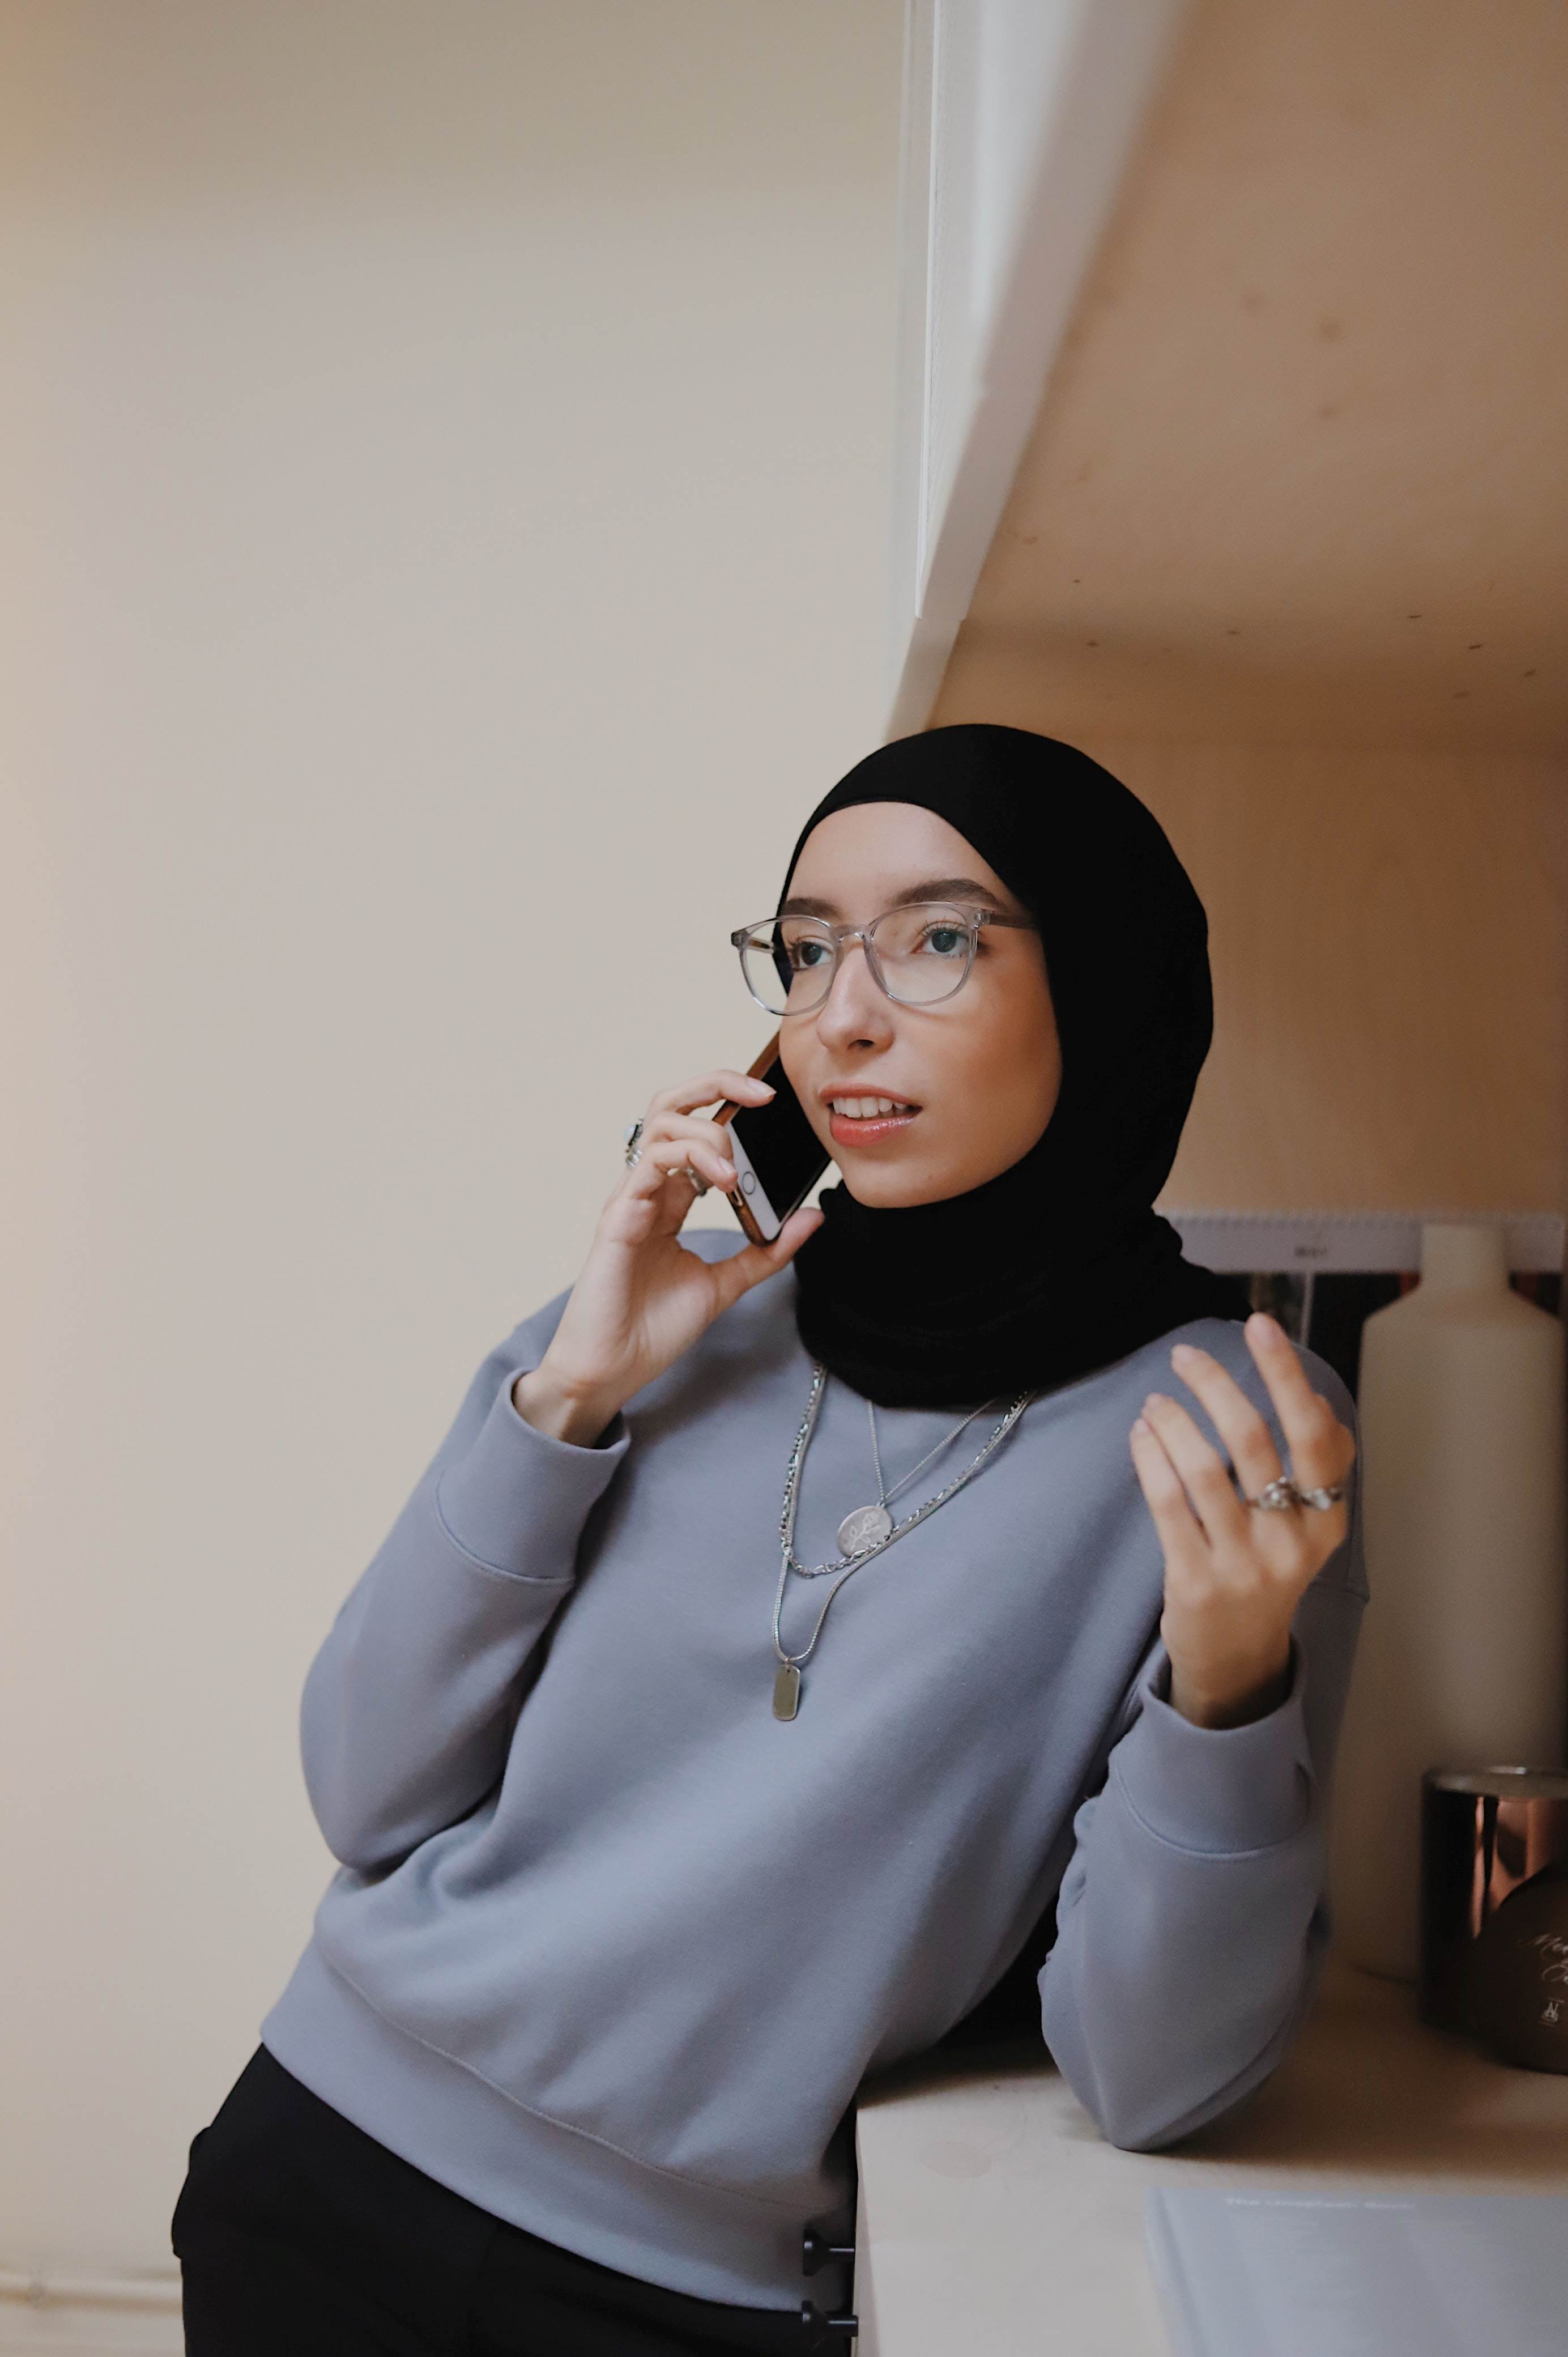 Person speaking on the phone